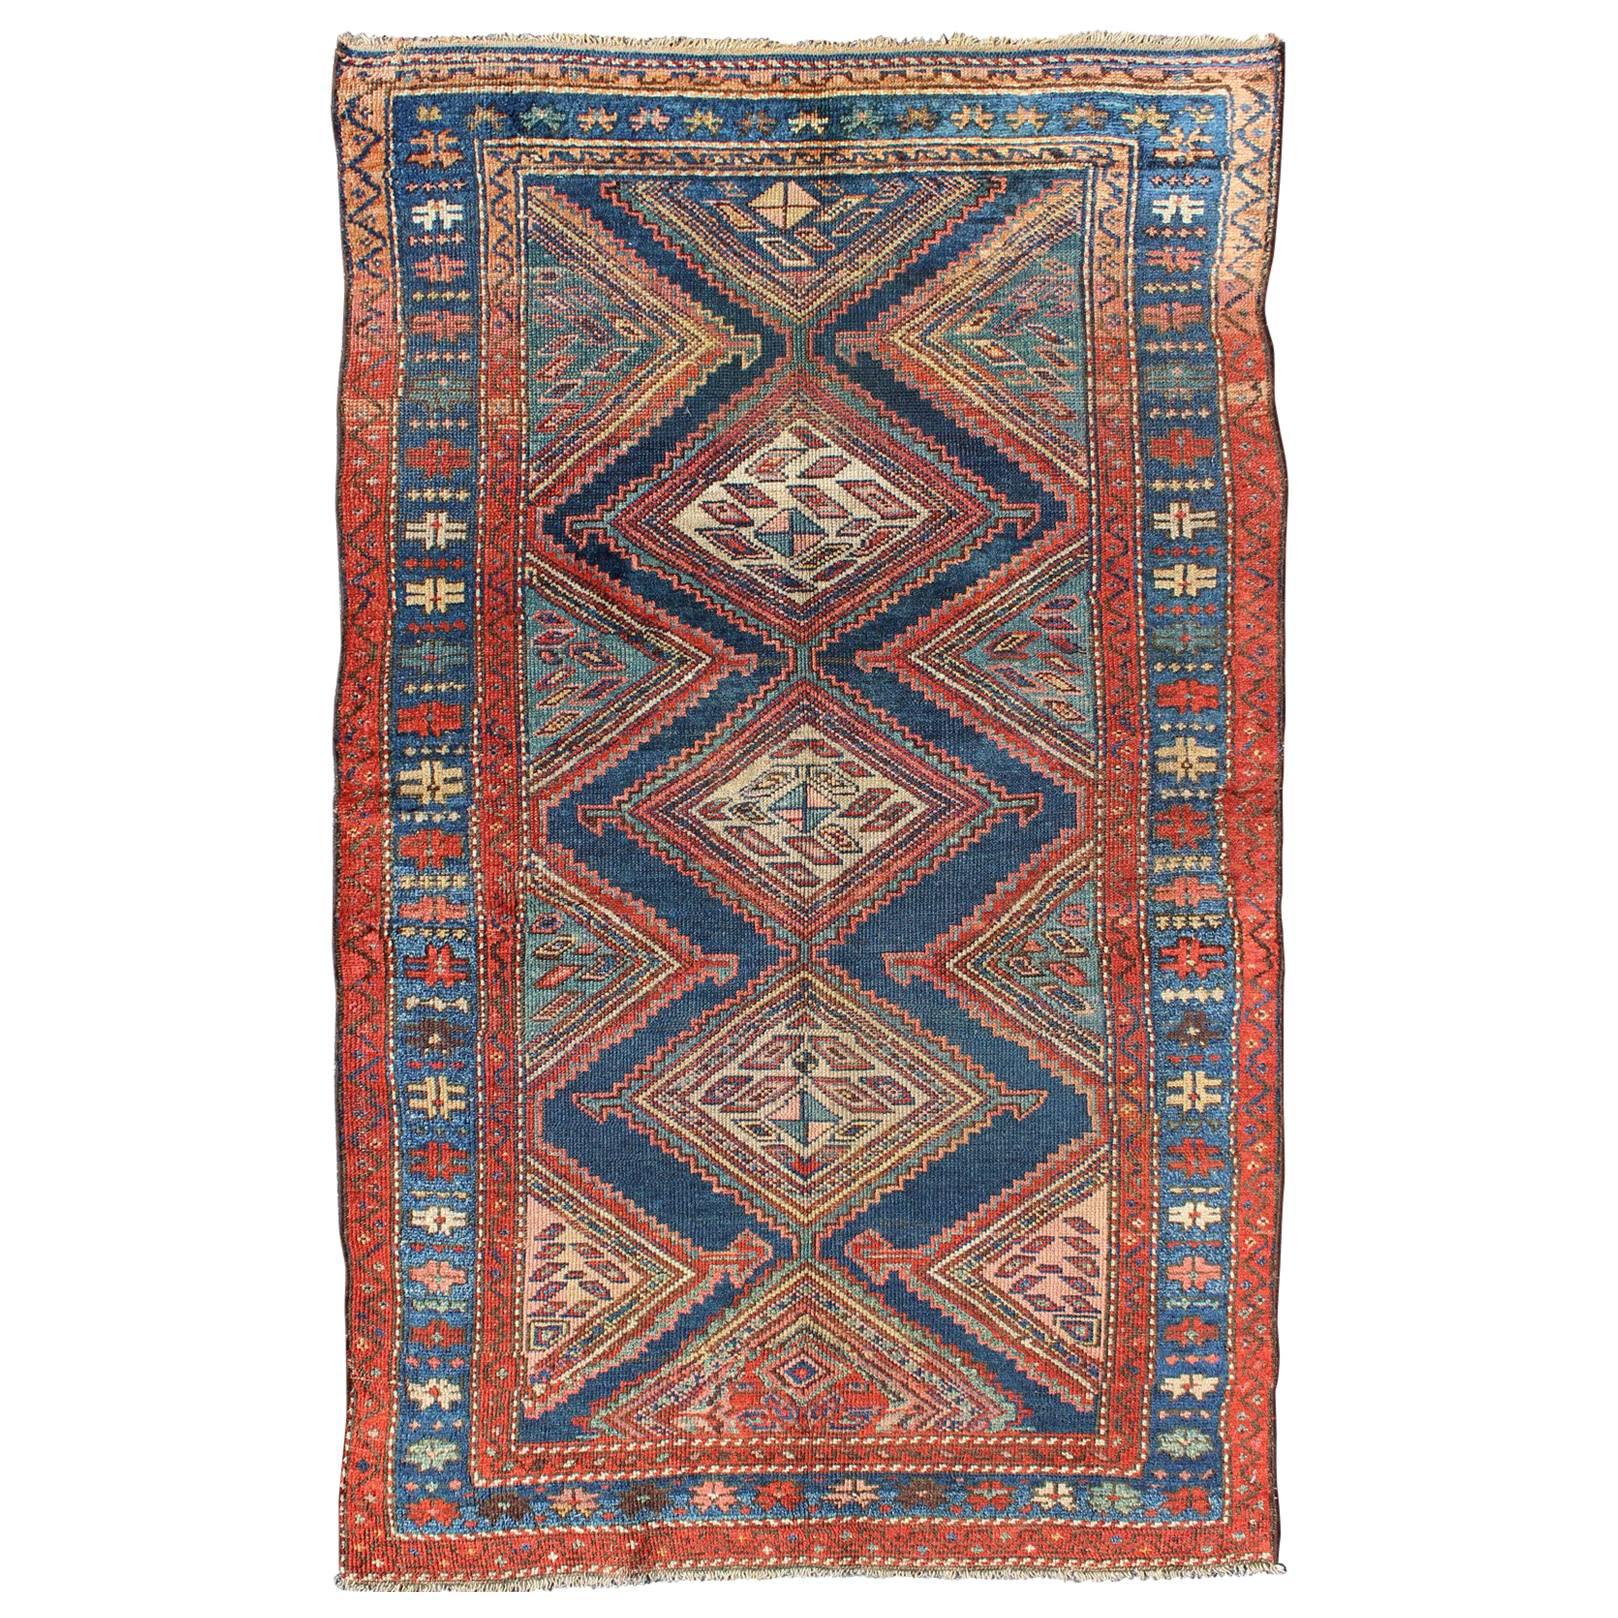 Antique N.W. Persian Malayer Tribal Rug with Diamond Design